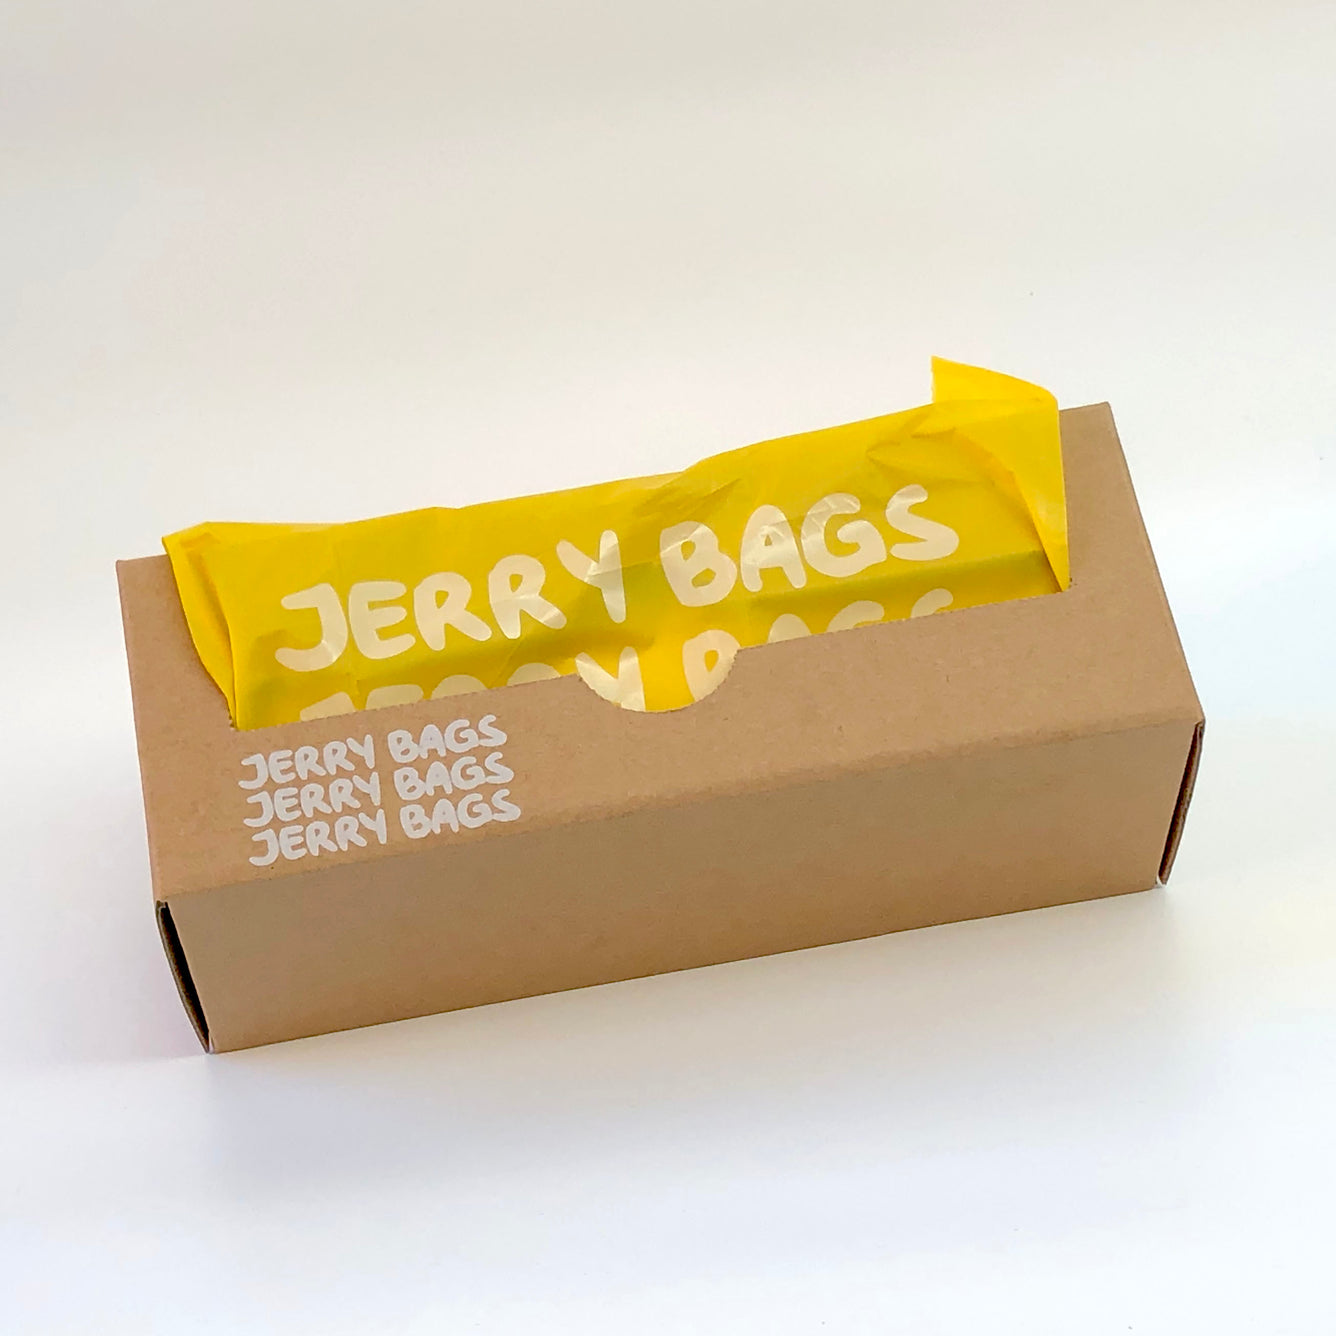 Jerry Bags Grab Bags dog poop bags compostable biodegradable kitty litter bag